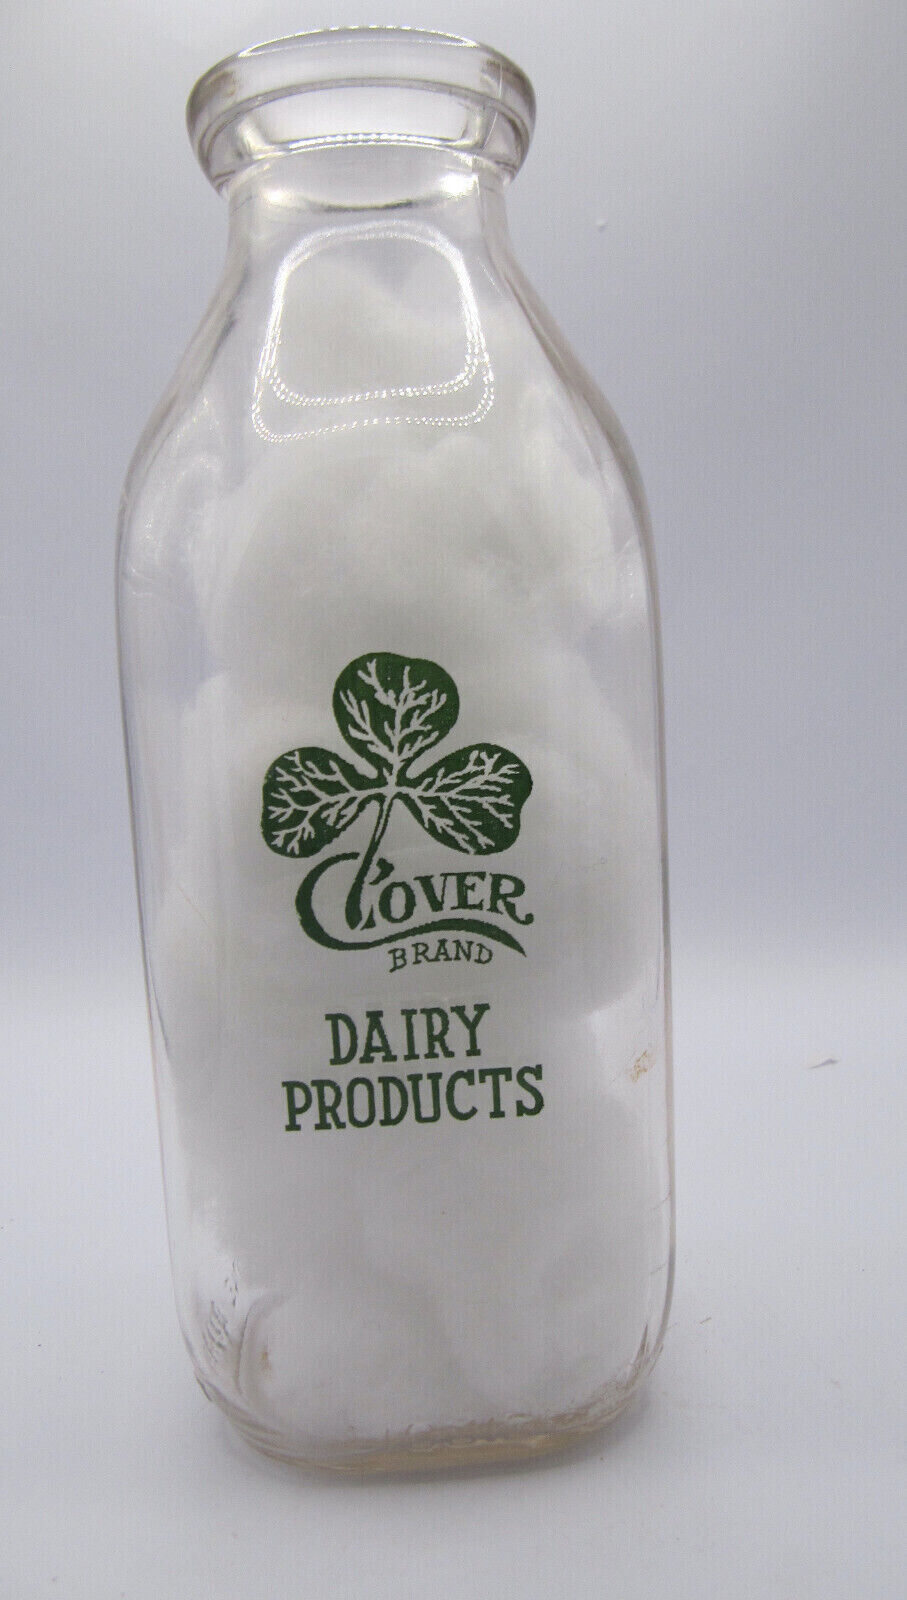 Clover Brand Dairy Products, Quart Bottle- Square, Green, RMBCollectables